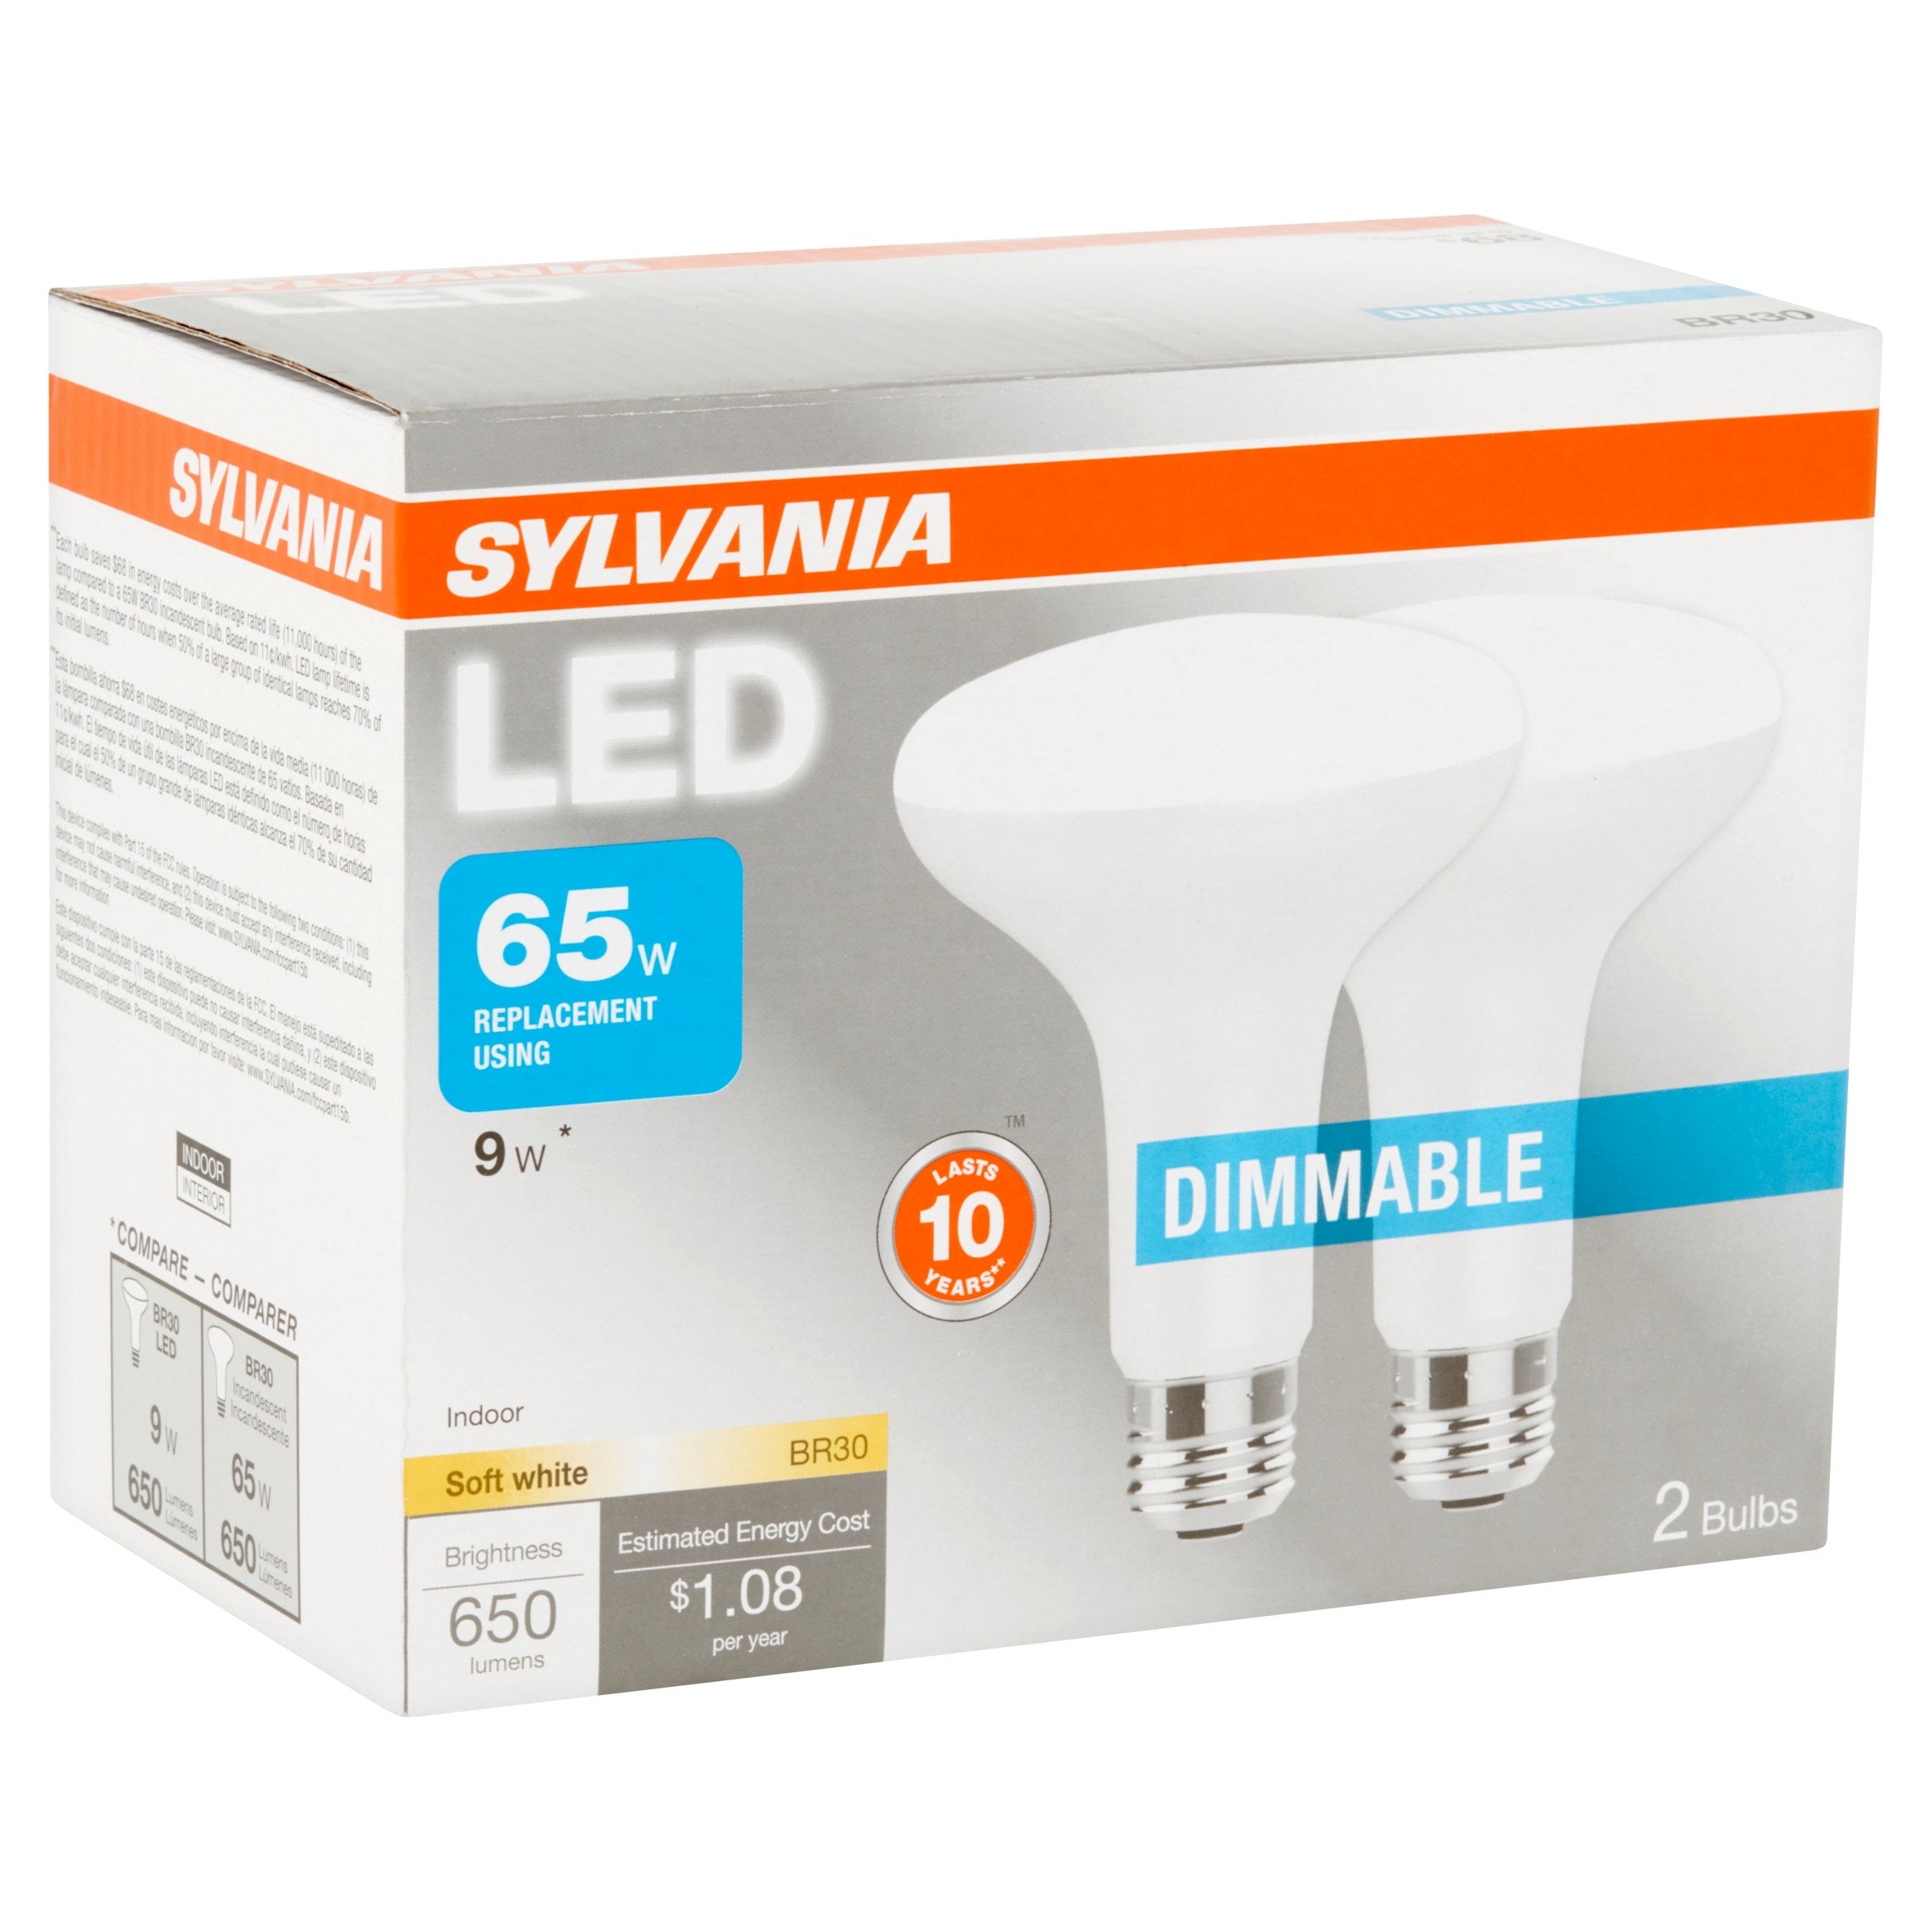 2-SYLVANIA LED 65 W REPLACEMENT BULBS Dimmable Soft Wht 9W 800 LUMEN BR30 Flood 